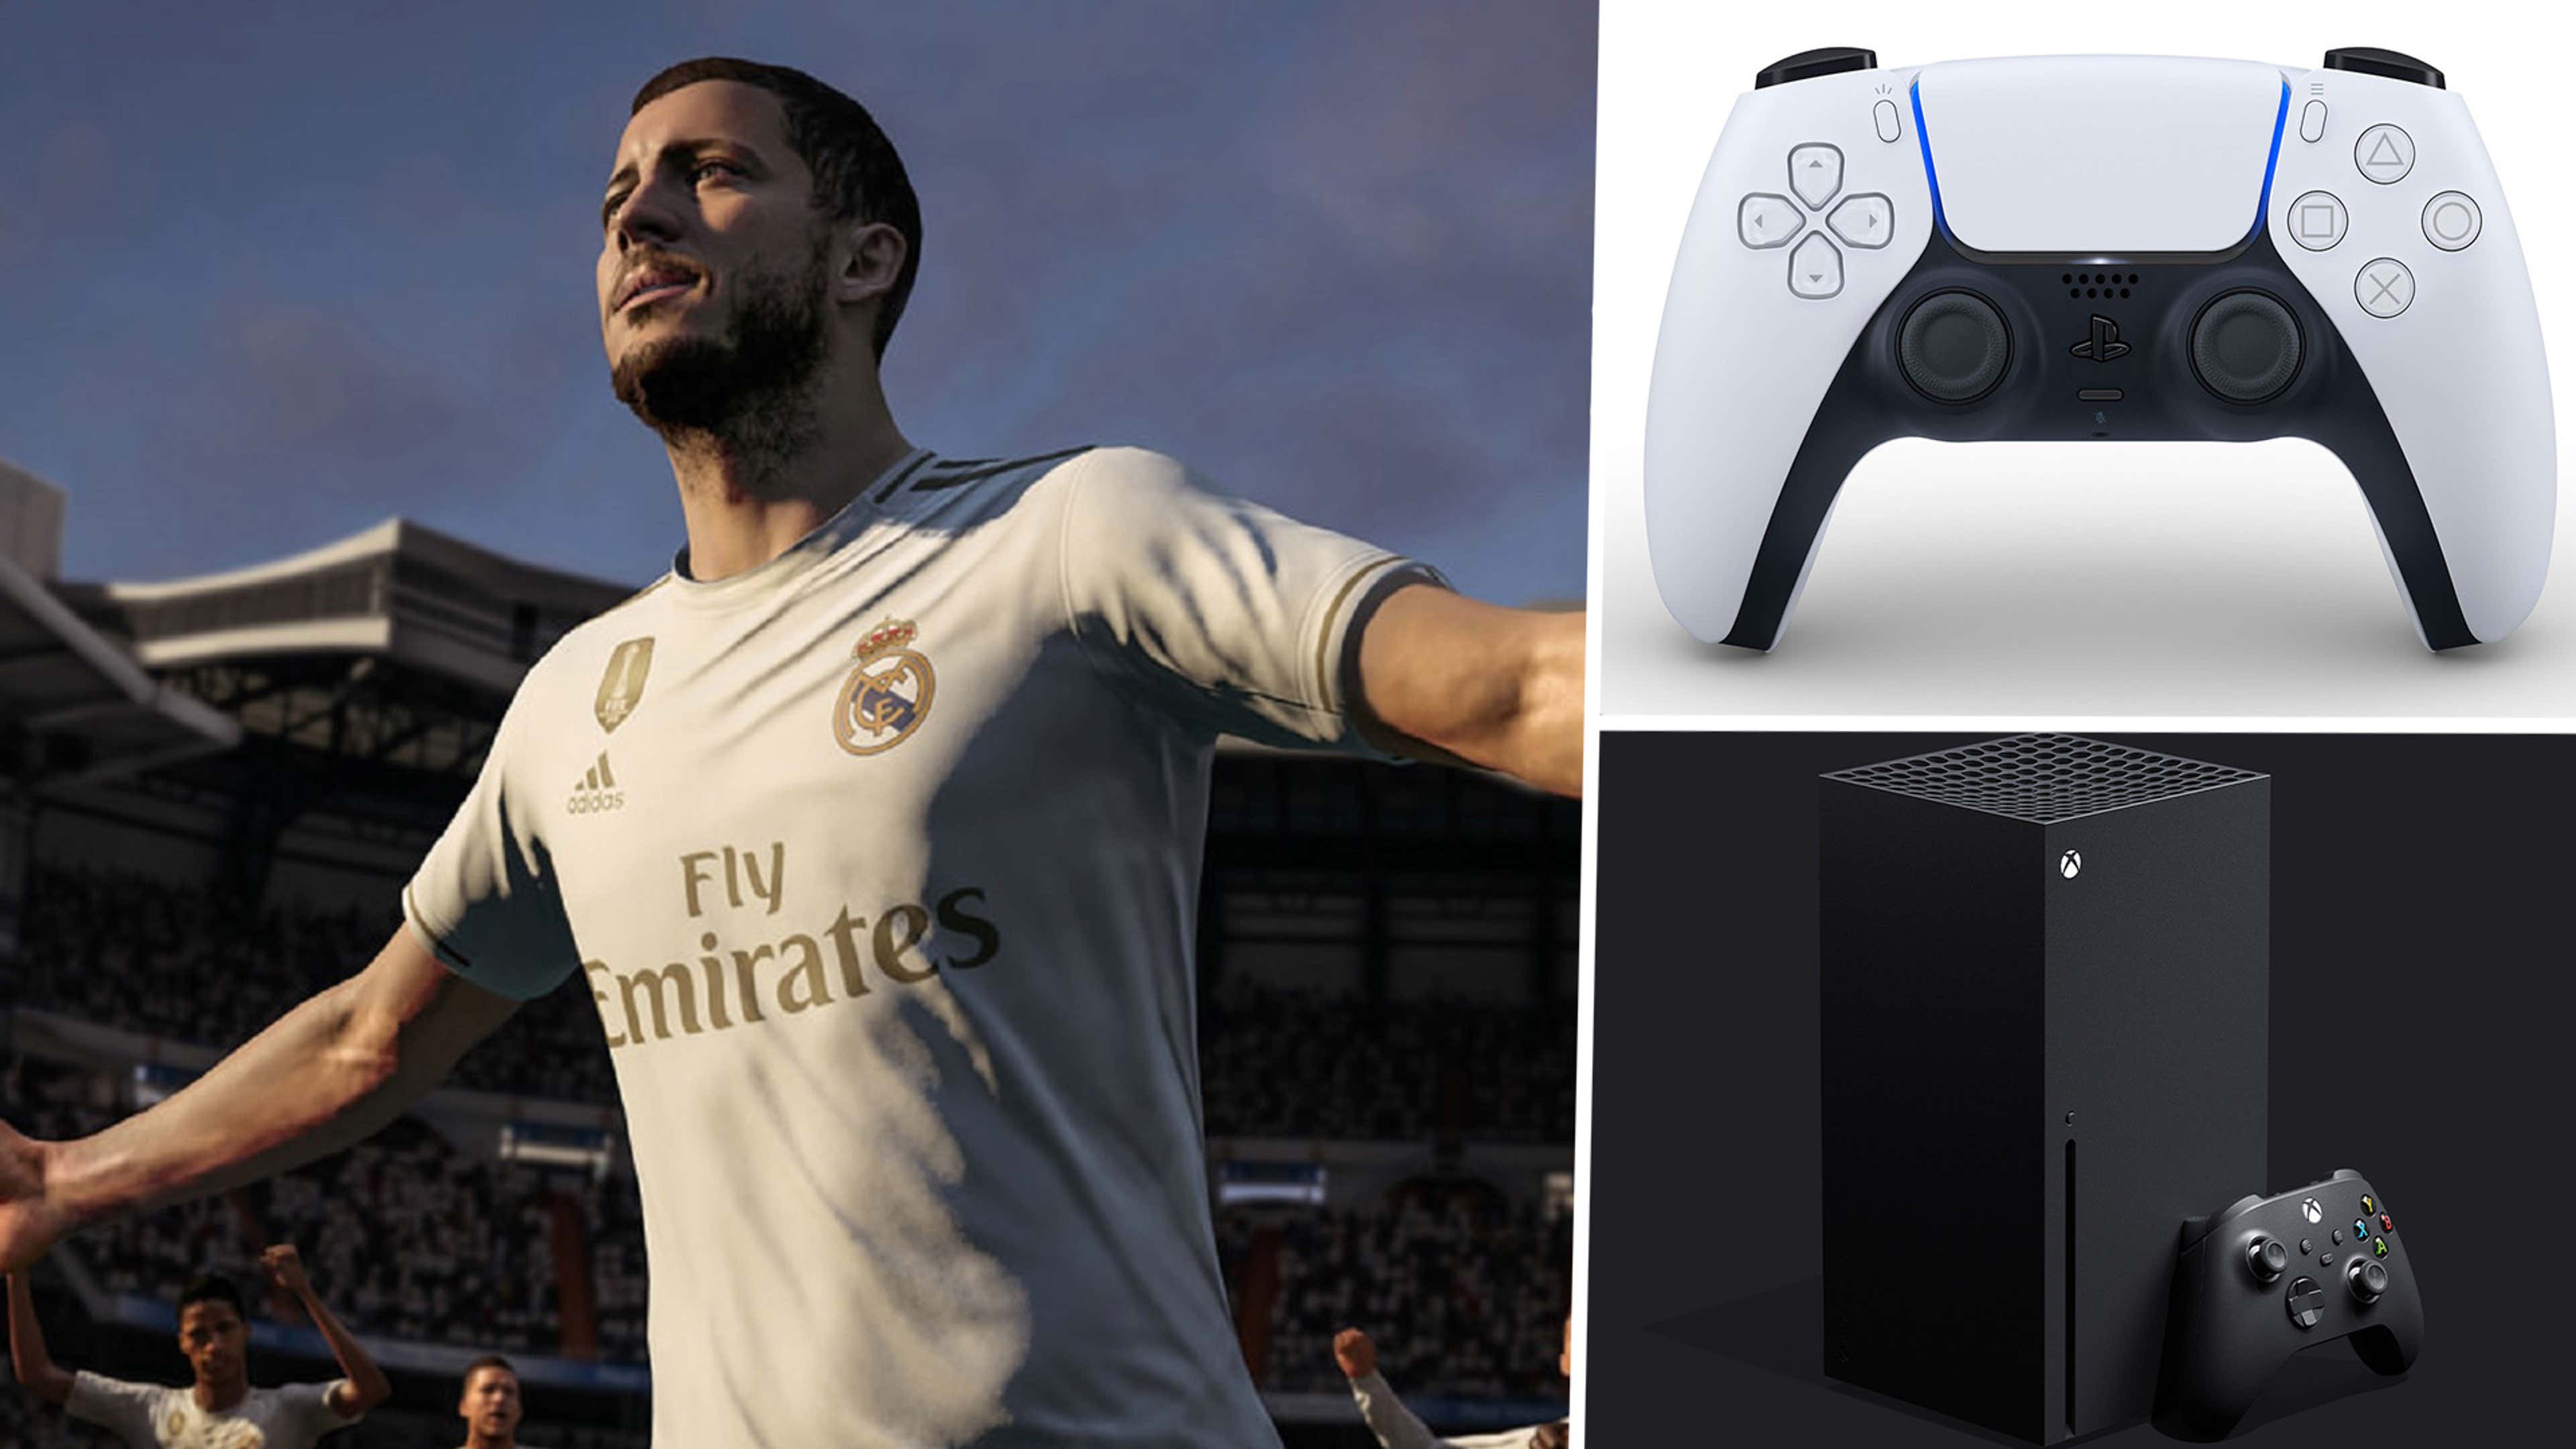 FIFA 21: How to get free upgrade to PlayStation 5 and Xbox Series X games